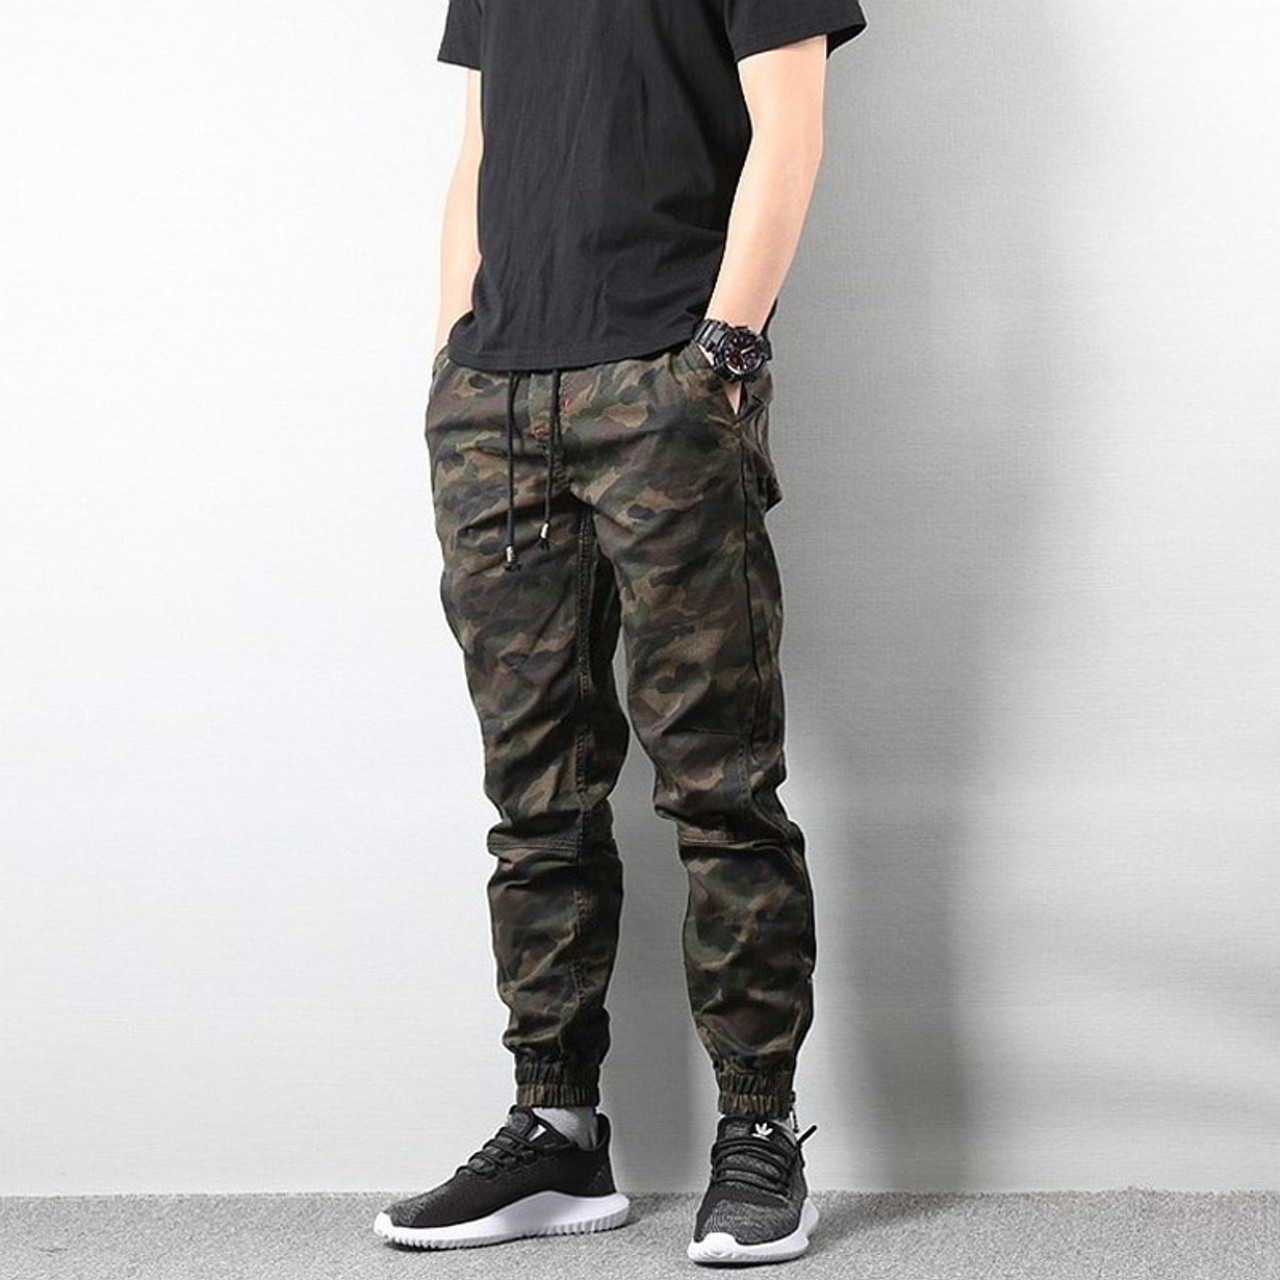 NIGRITY Tactical new fashion Pants Male Jogger Casual Plus Size Cotton  Trousers Multi Pocket Military Style Army mens Cargo pant  OnshopDealsCom